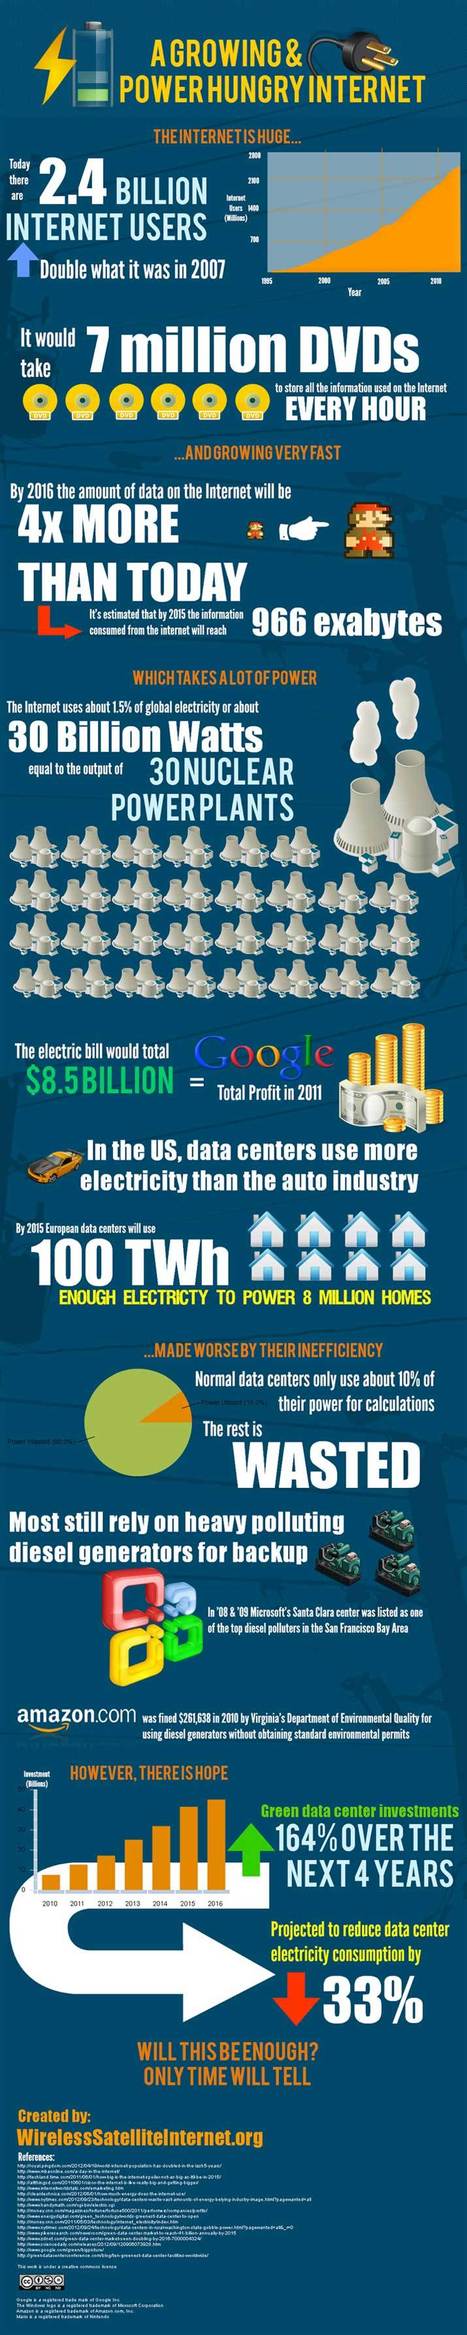 How Much Is the Internet's Electric Bill? [INFOGRAPHIC] | Business Improvement and Social media | Scoop.it